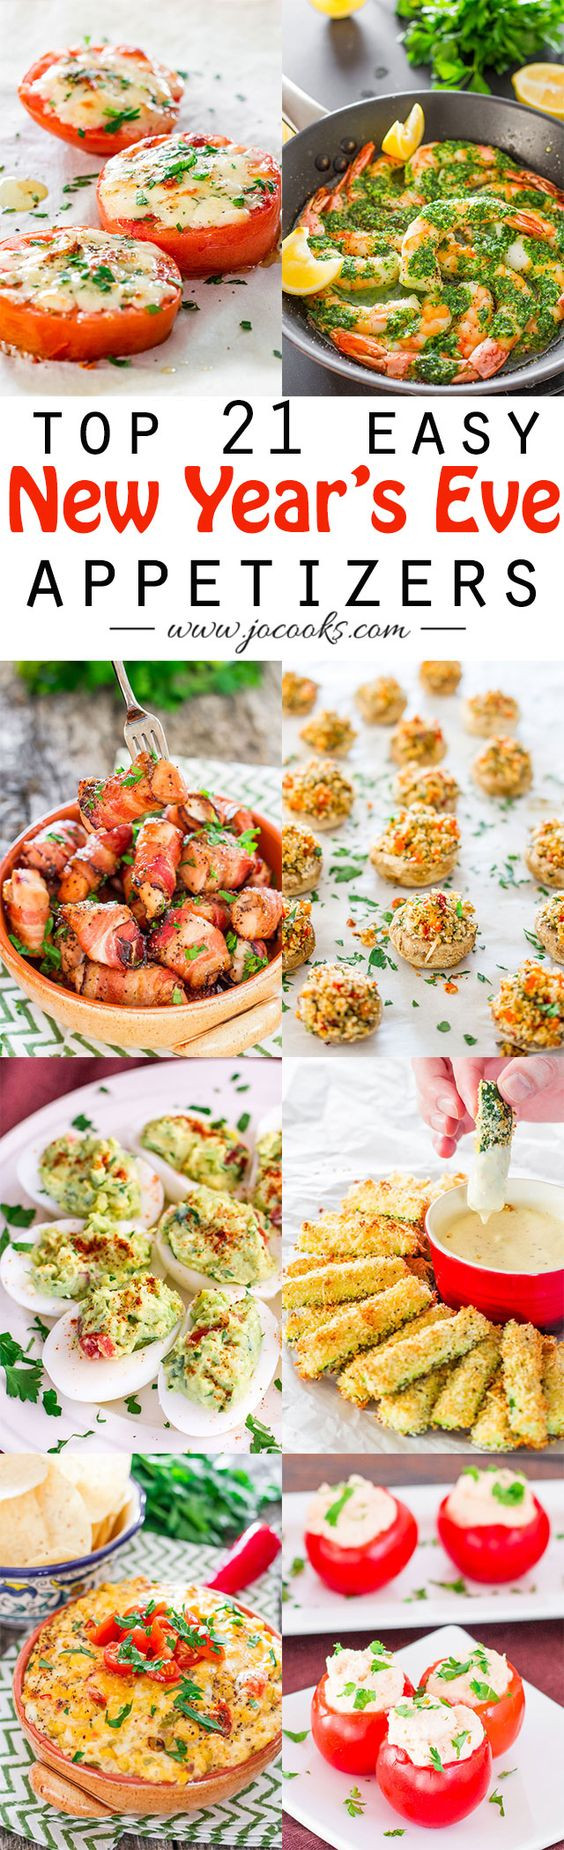 New Years Eve Appetizers Recipes
 21 Top Easy New Year s Eve Appetizers